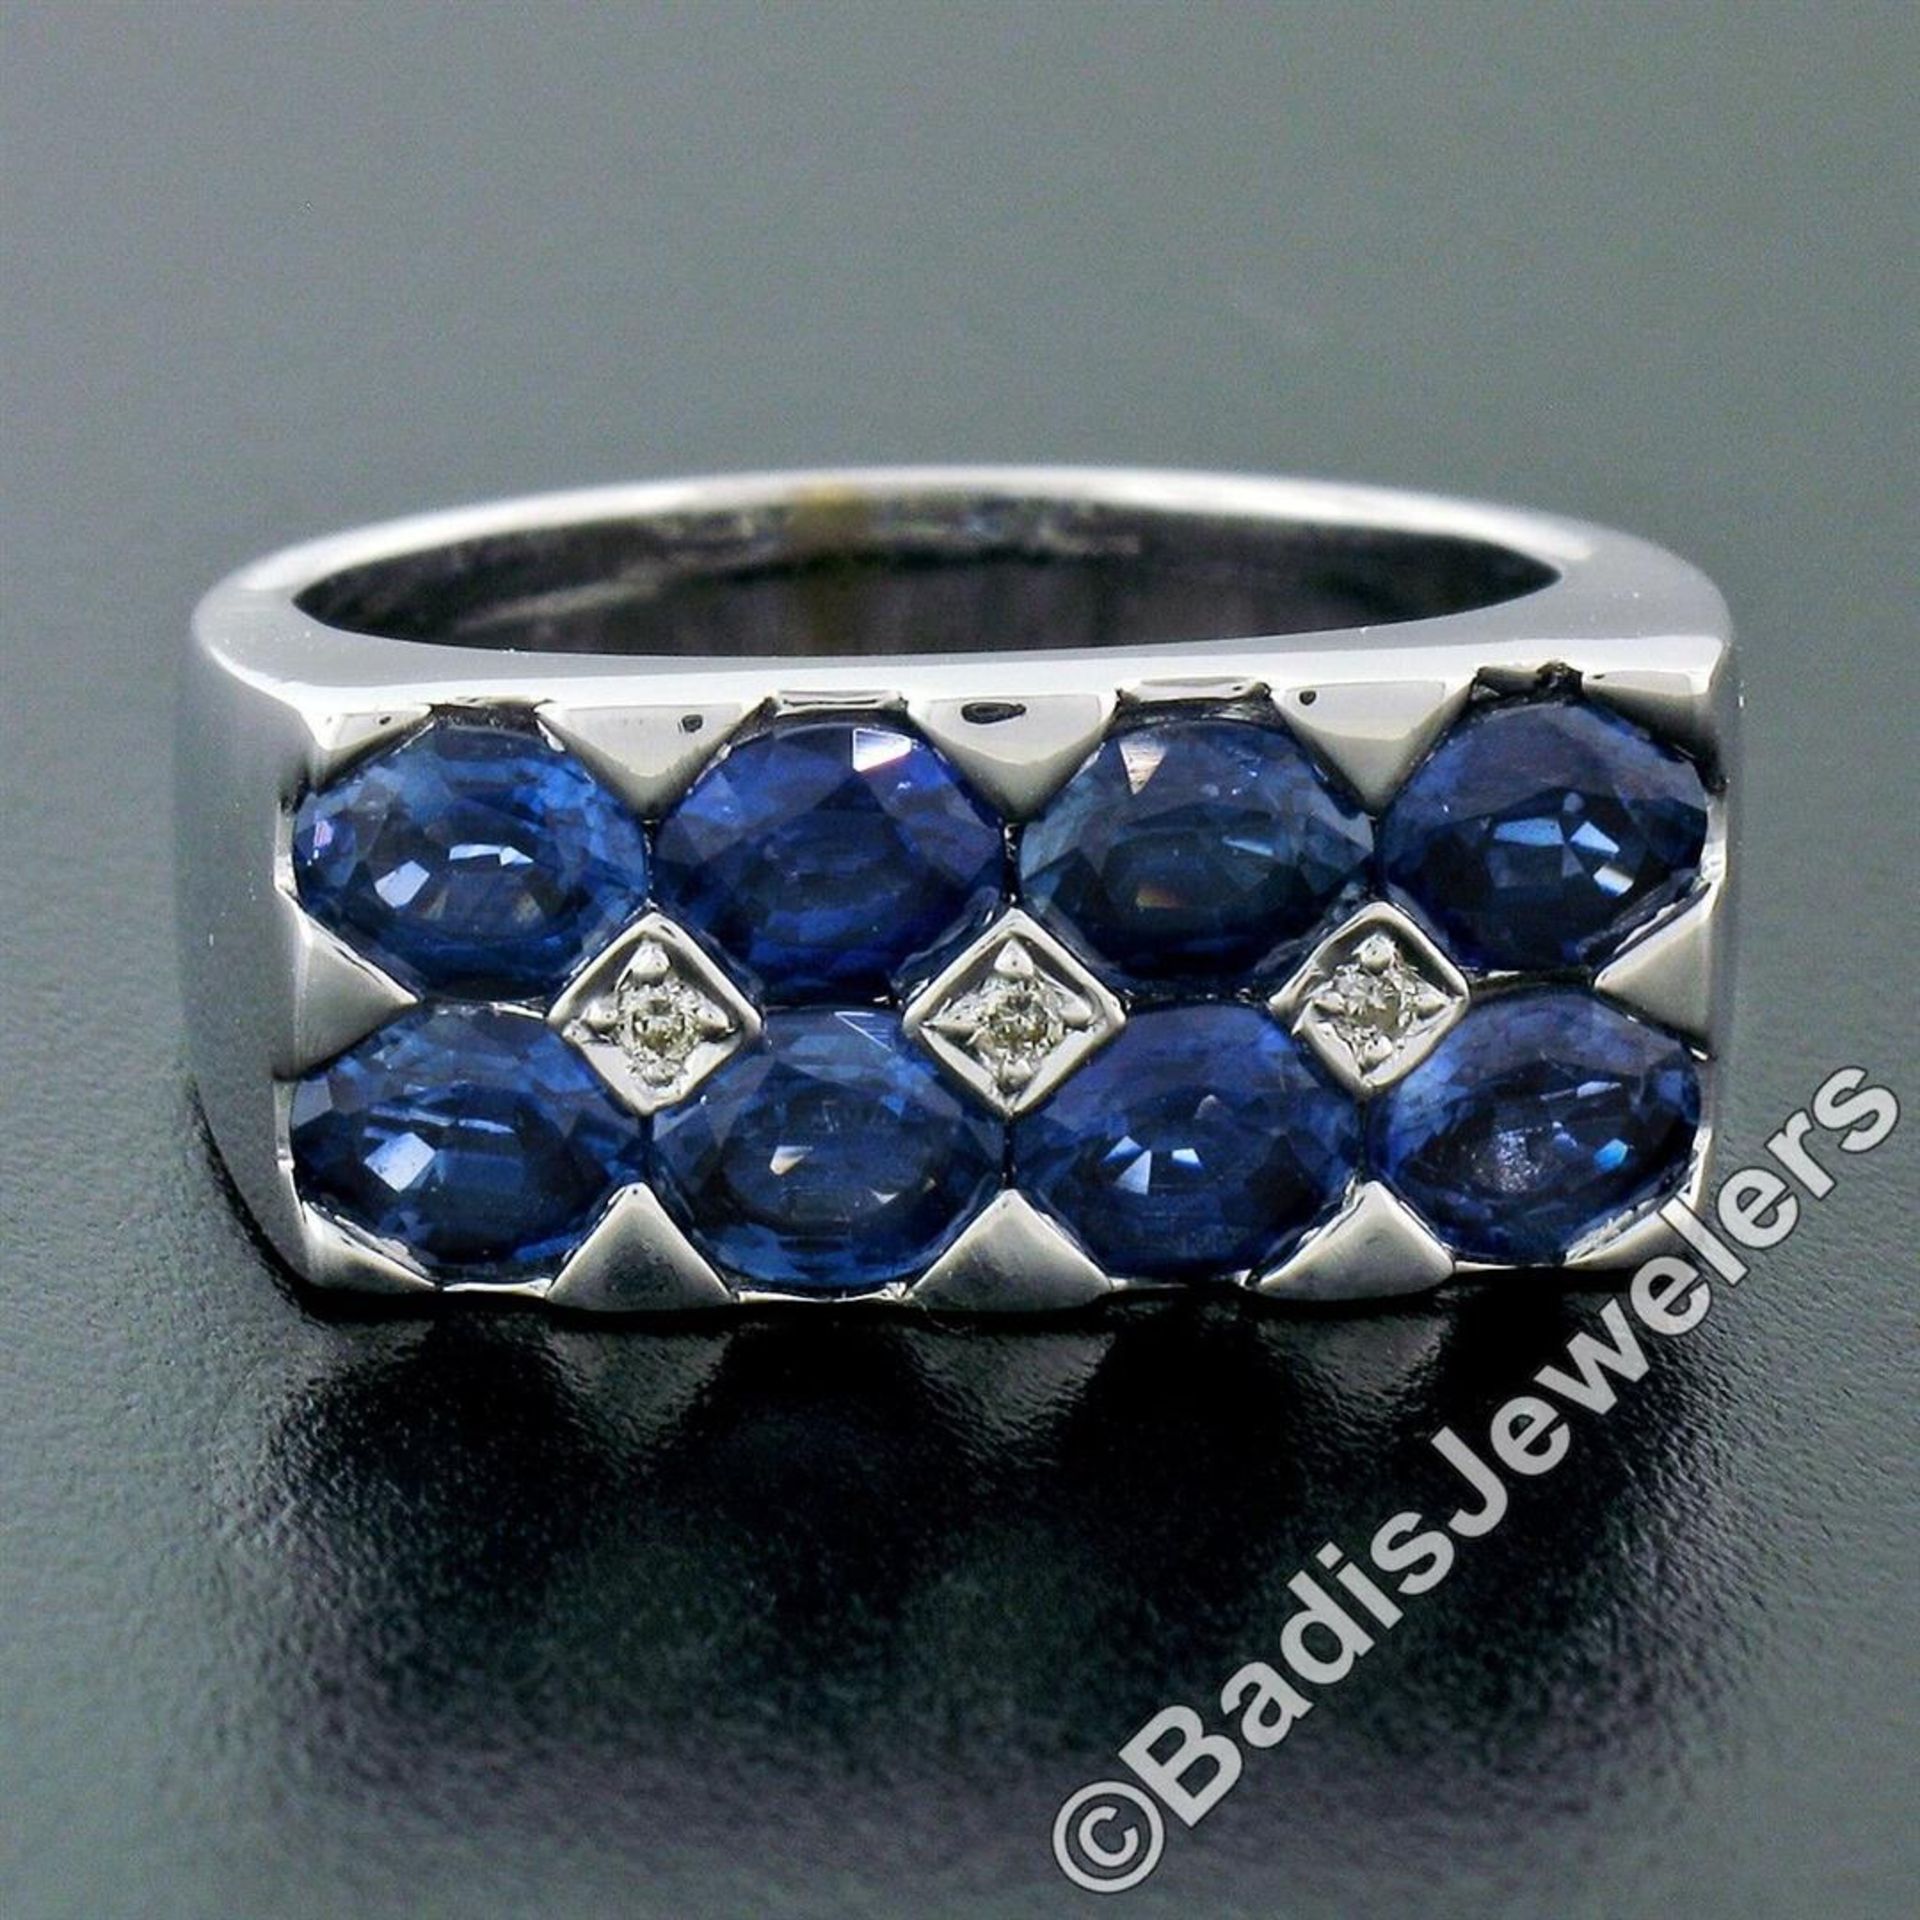 18kt White Gold 4.03ctw Dual Row Oval Cut Sapphire & Diamond Band Ring - Image 2 of 9